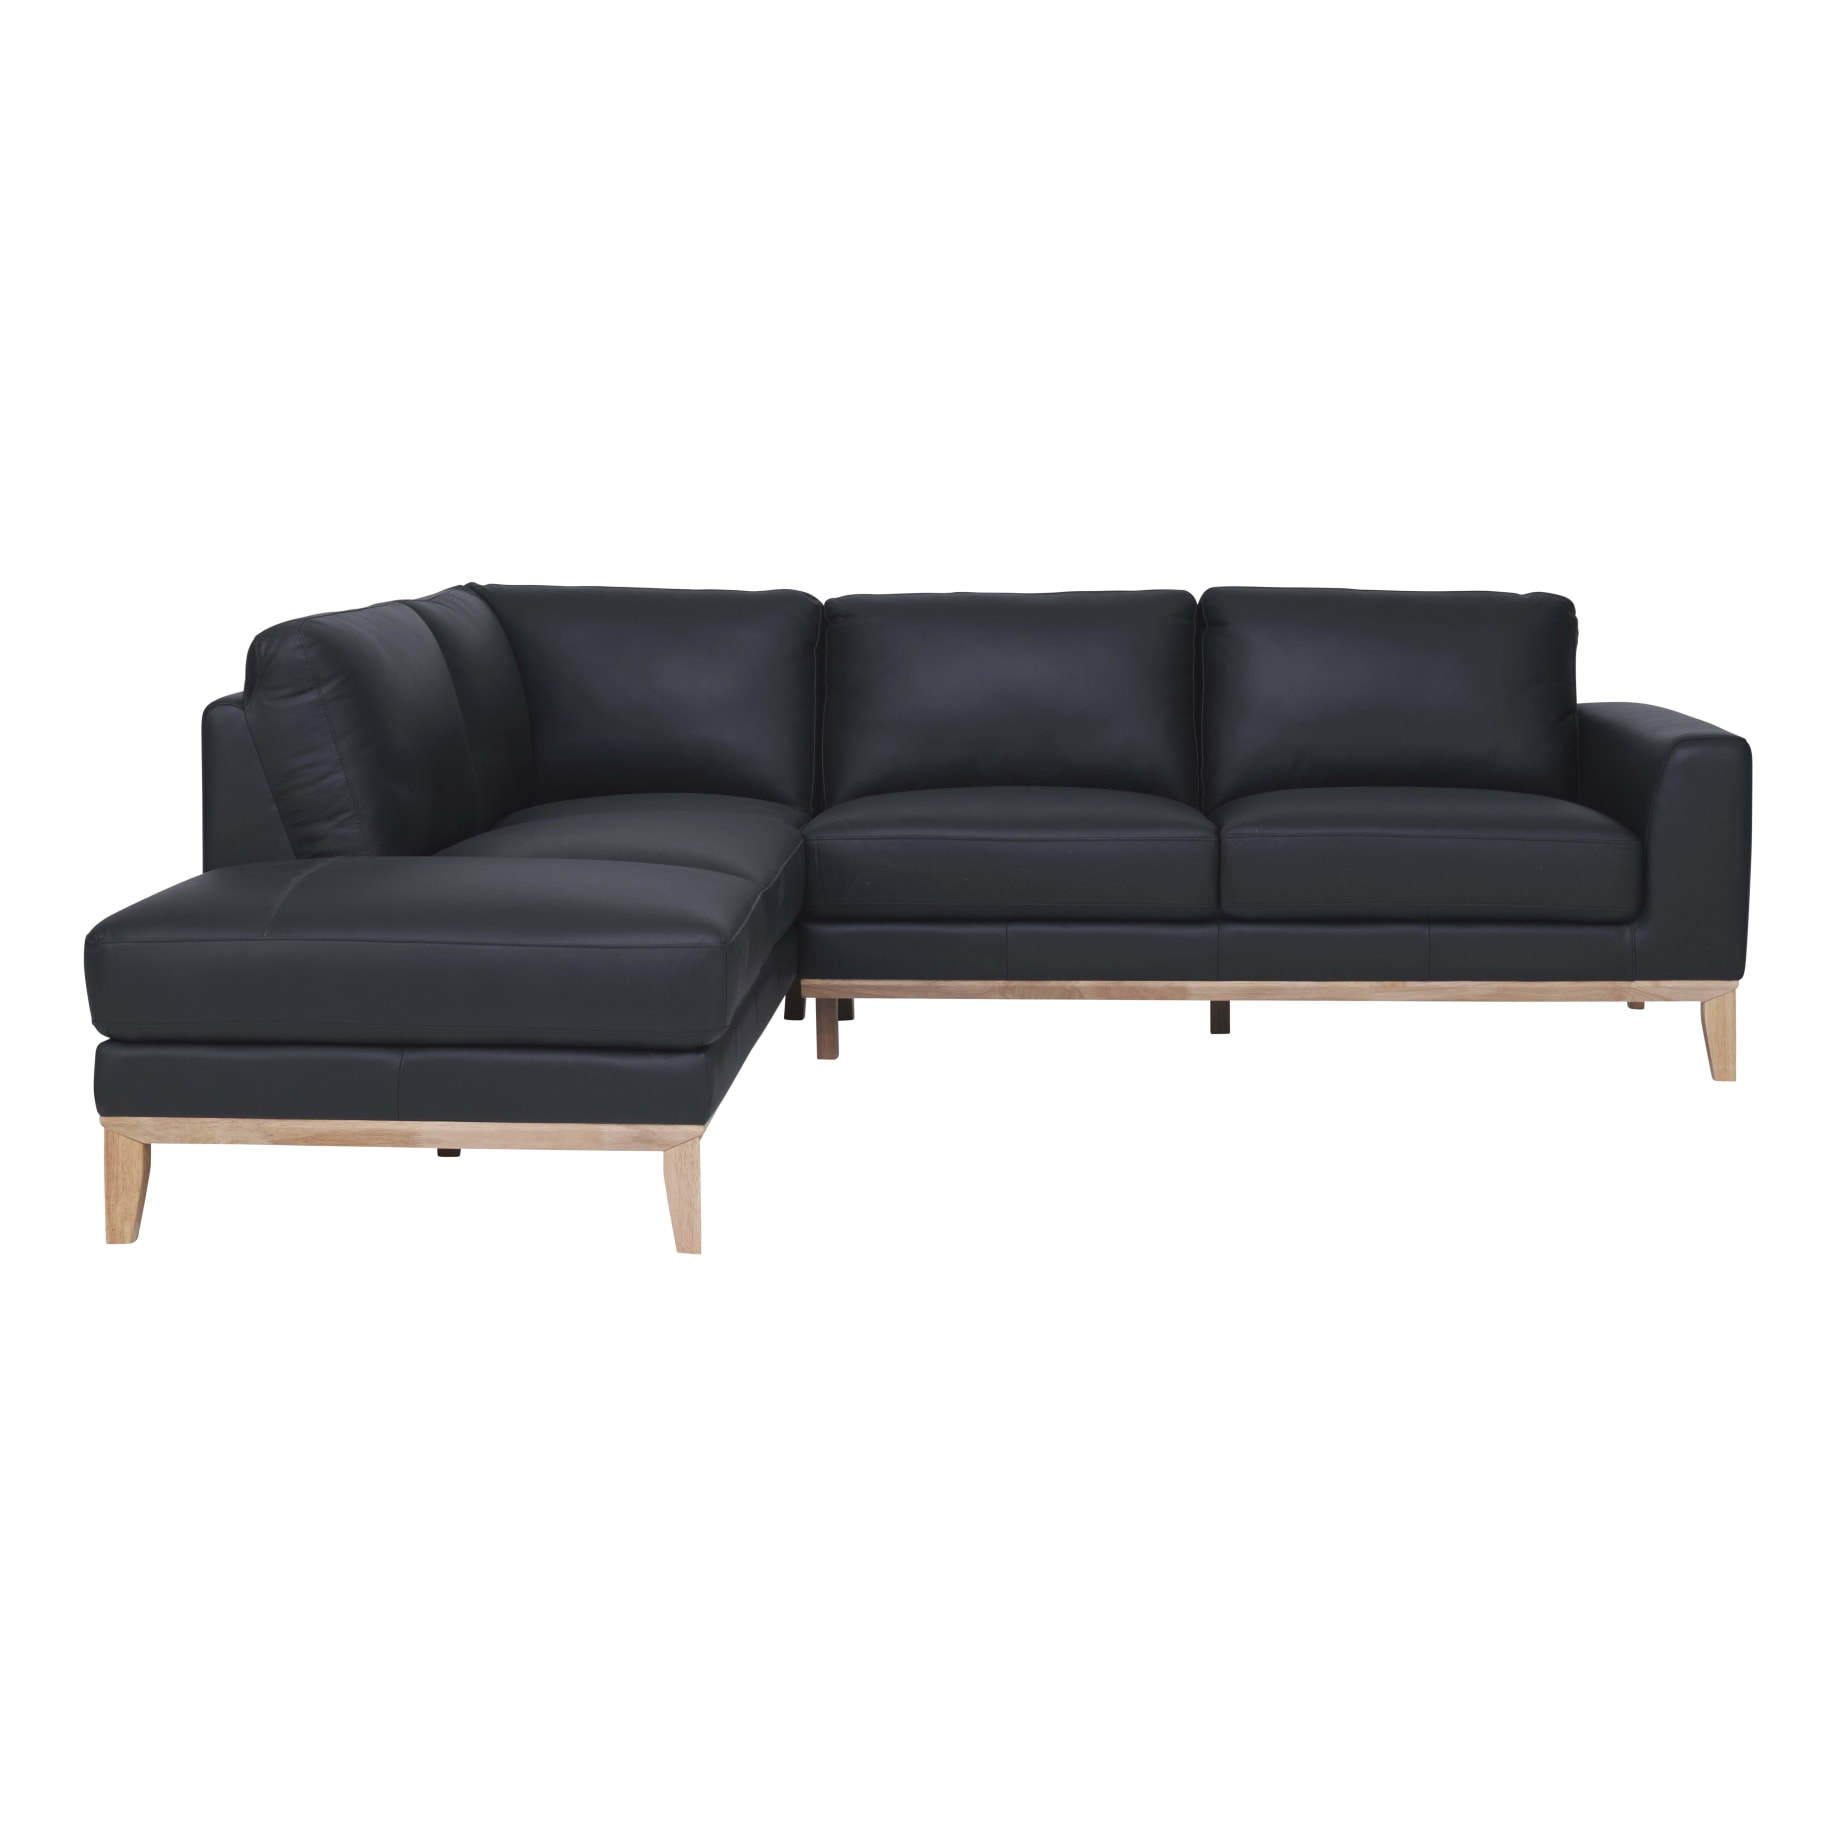 Dante 2.5 Seater Sofa + Chaise LHF in Leather Black